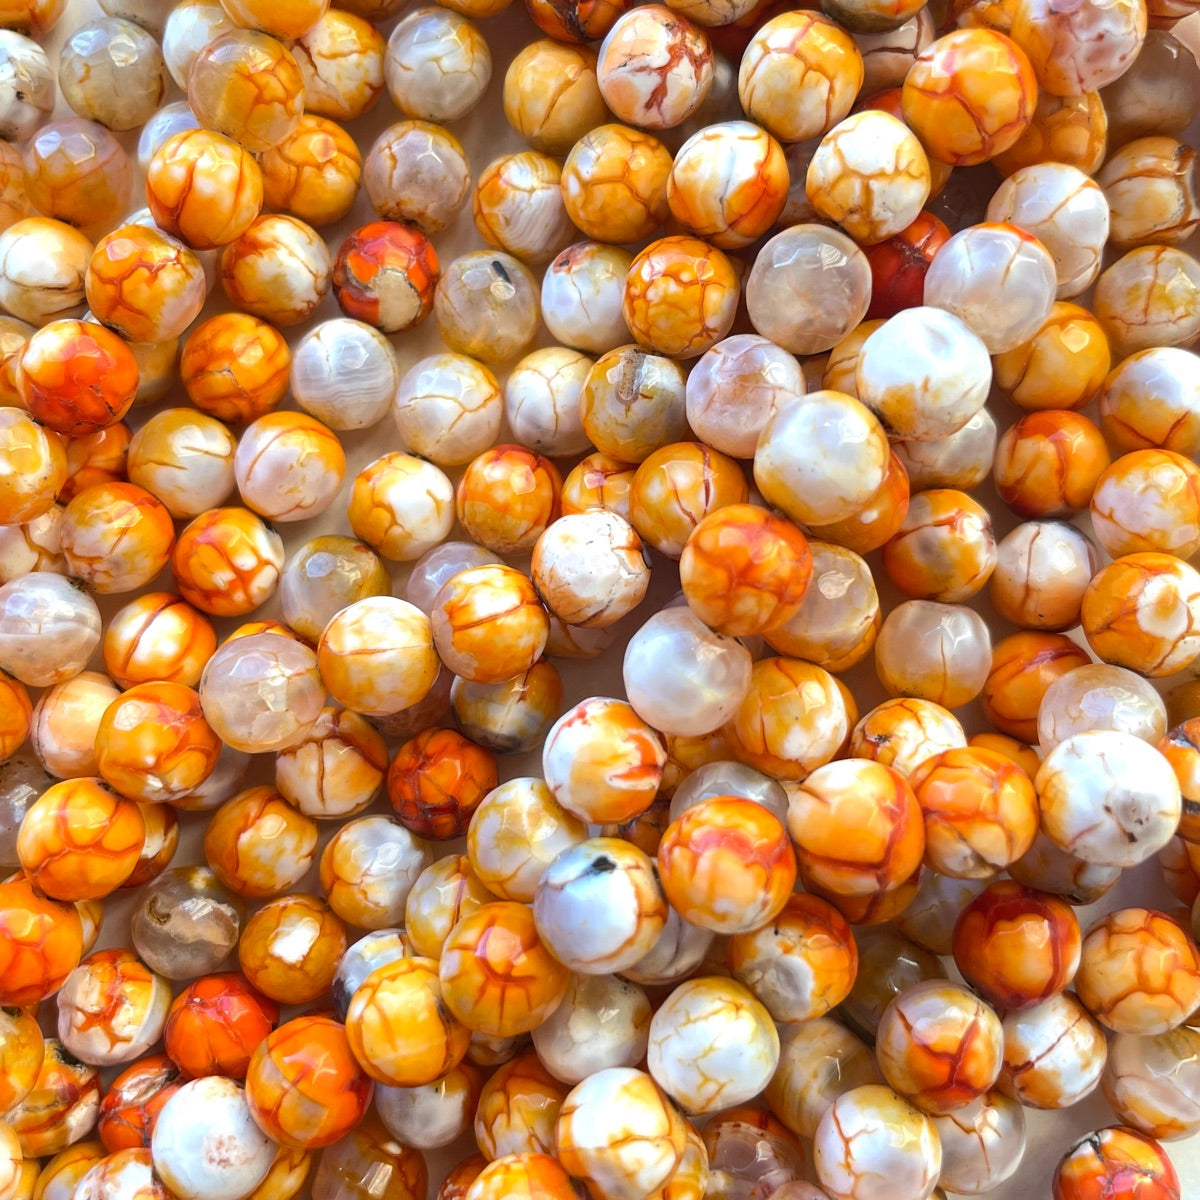 2 Strands/lot 8mm Colorful Cracked Fire Agate Faceted Stone Beads Yellow Stone Beads 8mm Stone Beads Faceted Agate Beads New Beads Arrivals Charms Beads Beyond